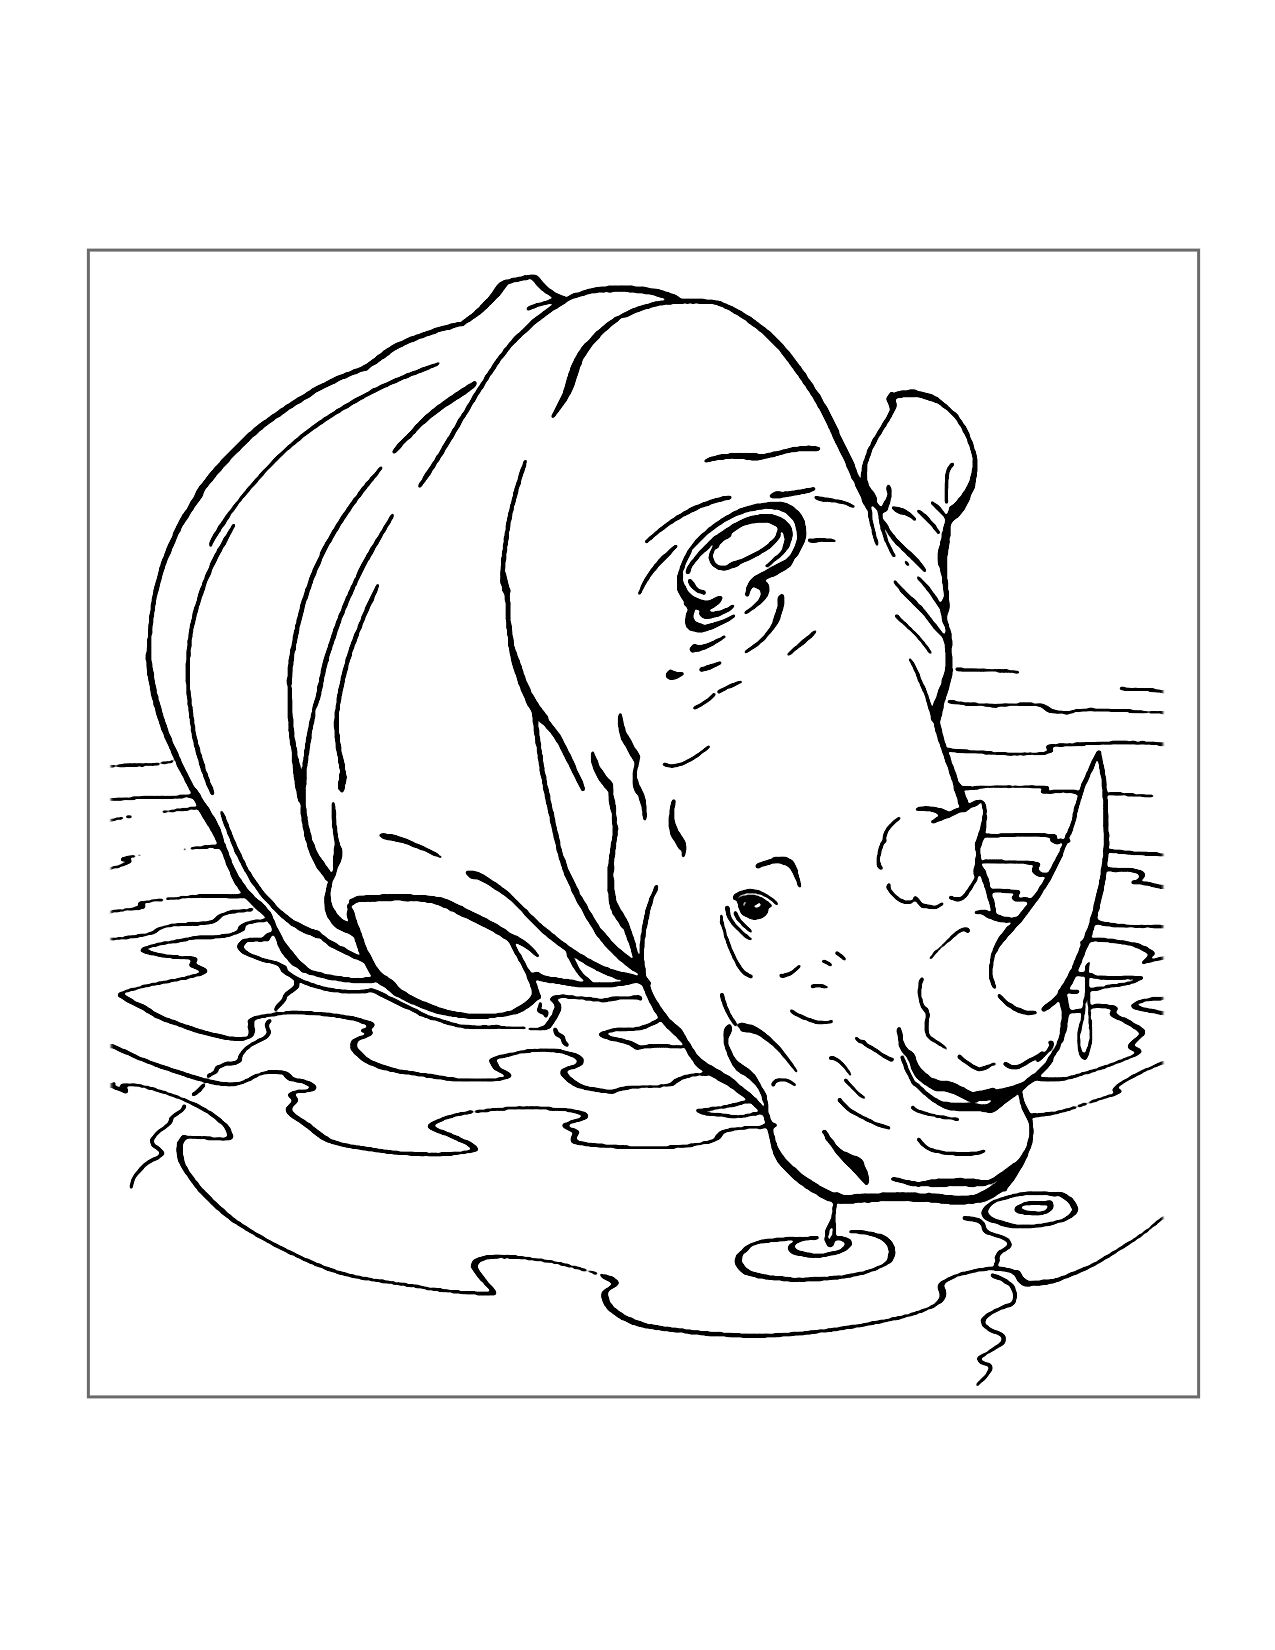 Rhino In The Water Coloring Page